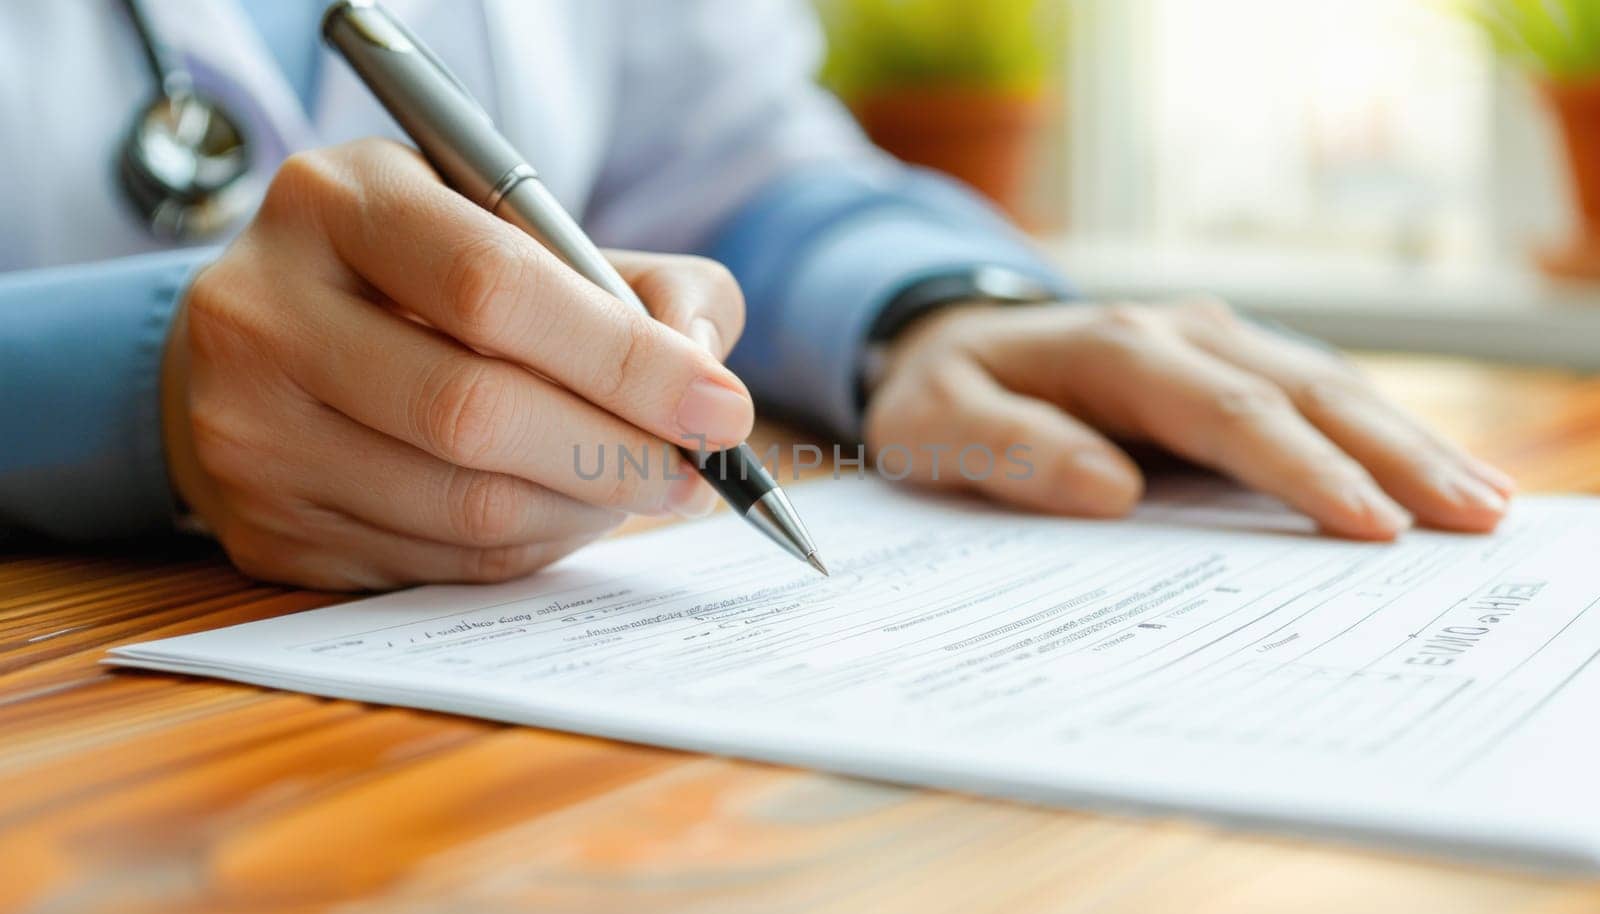 The individual is carefully using a pen to write on a piece of paper, displaying precision and attention to detail